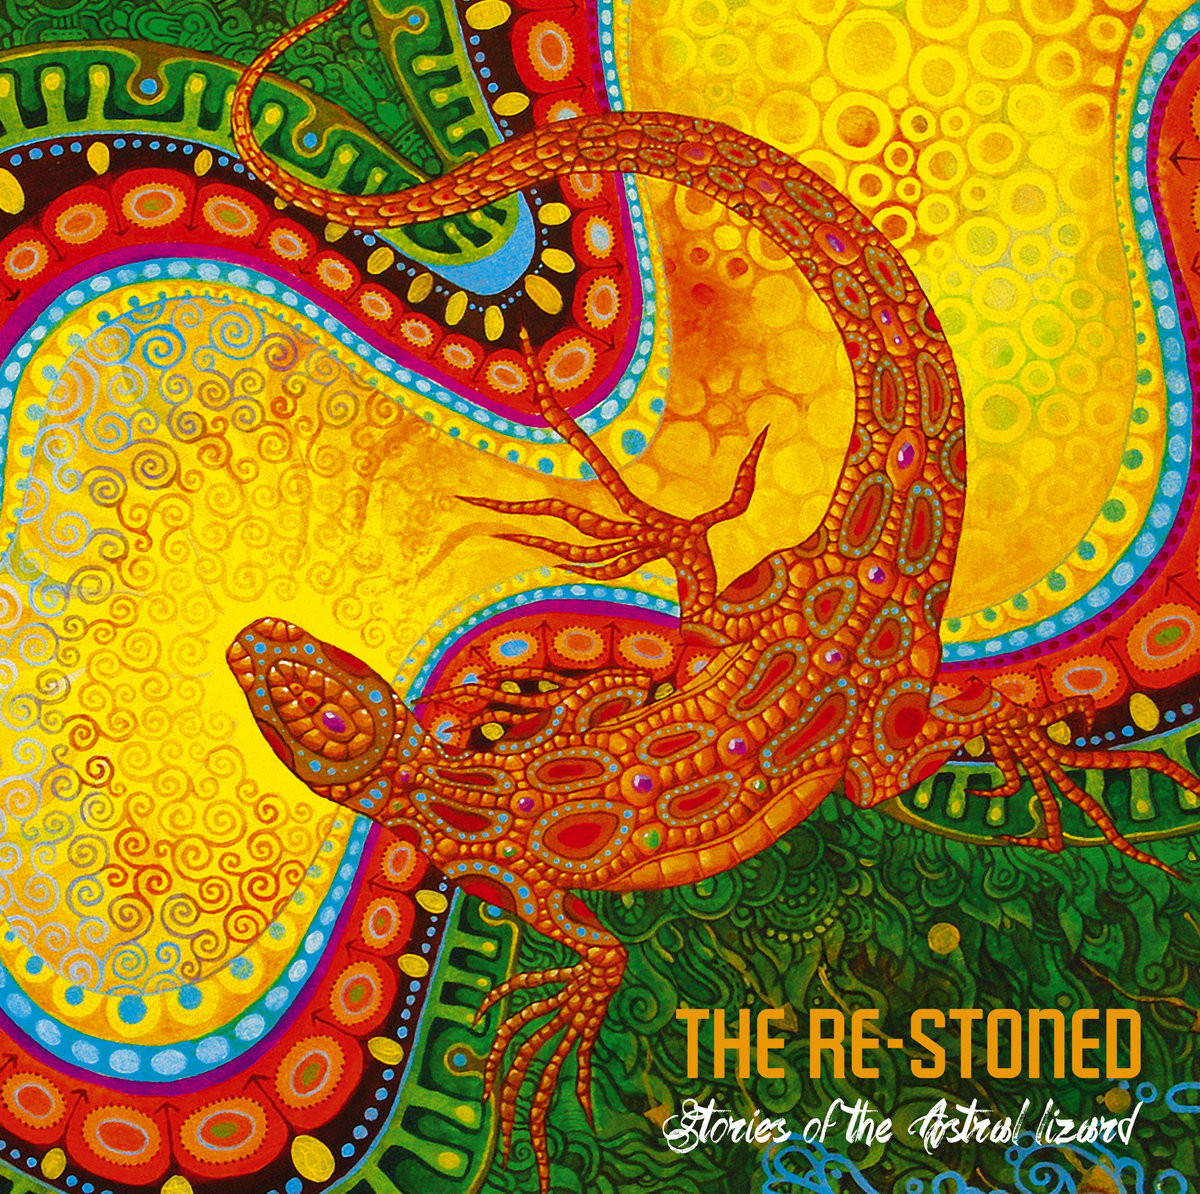 Stories of the astral lizard
-by The Re-Stoned
re-stoned.bandcamp.com/album/stories-… 

#Bandcamp #acoustic #rock #acidfolk #acousticguitar #ambient #electroacoustic #instrumental #psych #psychedelia #PsychedelicRock #stoner #NYC #Brooklyn #Queens #Bronx #StatenIsland #LongIsland #Prog #USA